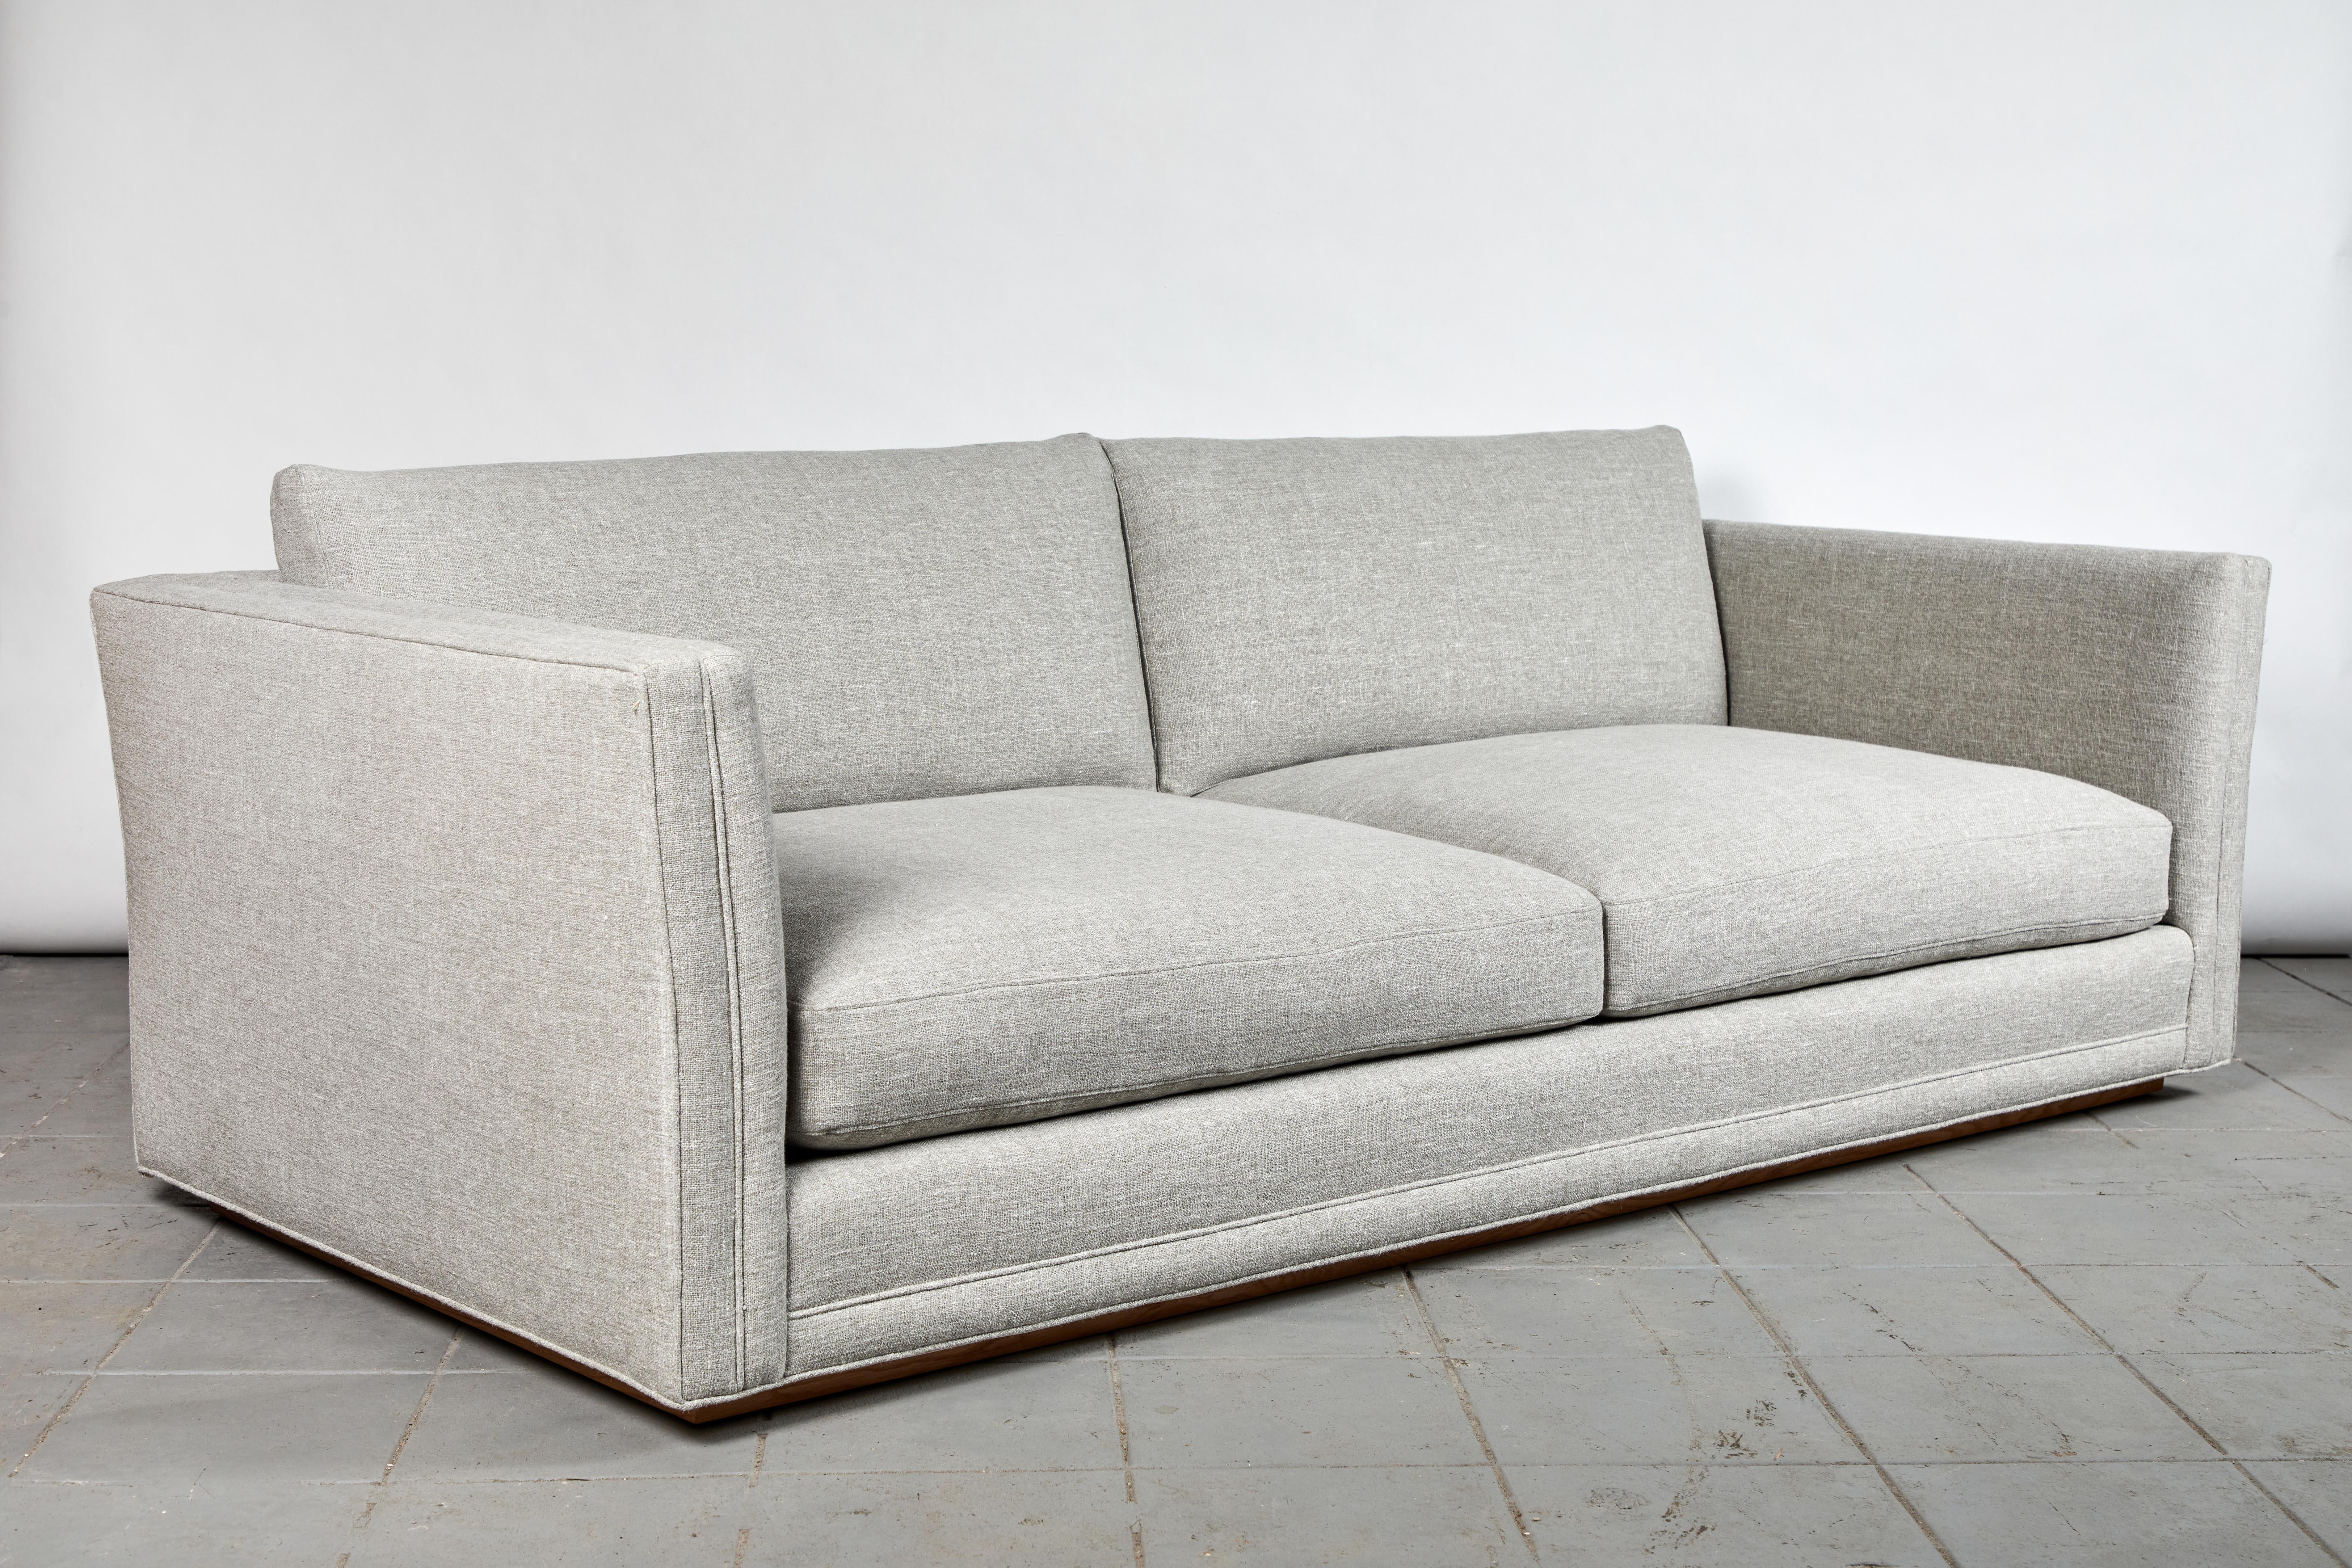 The double welt and slight fare to the modern lounge sofa make it a distinct, Classic piece. Its generous depth adds to the comfort of the down-encase foam inserts. Solid frame, hand-tied springs, and recessed solid walnut plinth shadow base present